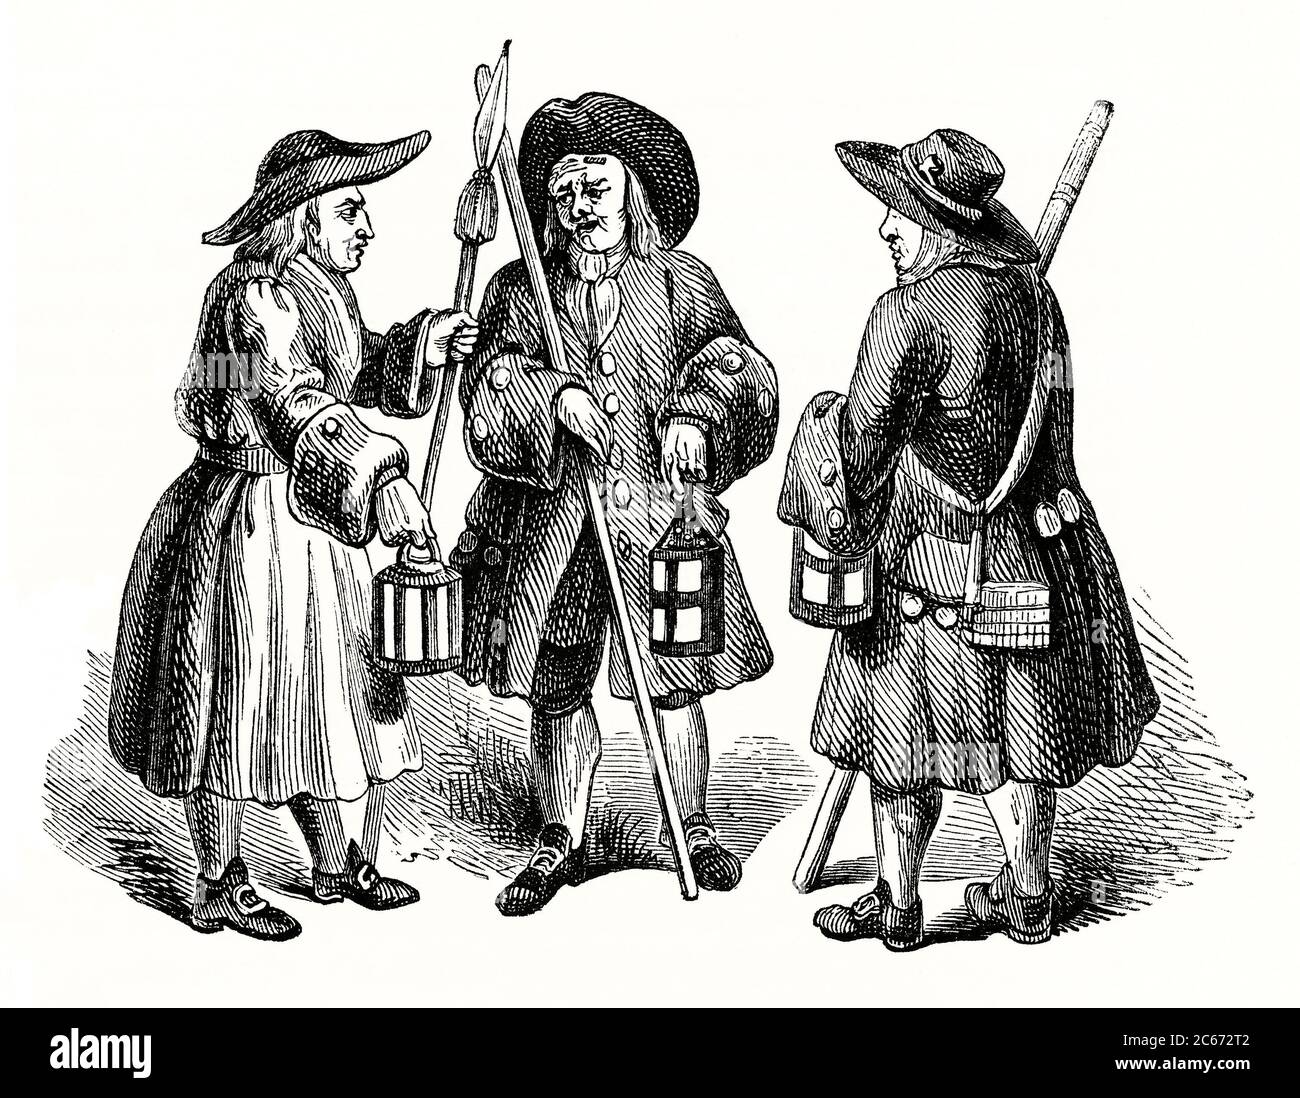 An old engraving of Watchmen with their lamps and staffs. Watchmen were organised groups of men, usually authorised by a state, government, city, or society, to deter criminal activity and assist in public safety, fire watch and crime prevention. This civic duty has existed since earliest recorded times in various forms throughout the world and were eventually replaced by formal professional police forces. In Britain night watchmen patrolled the streets from 9 or 10 pm until sunrise. These patrols continued in the late 17th century. Stock Photo